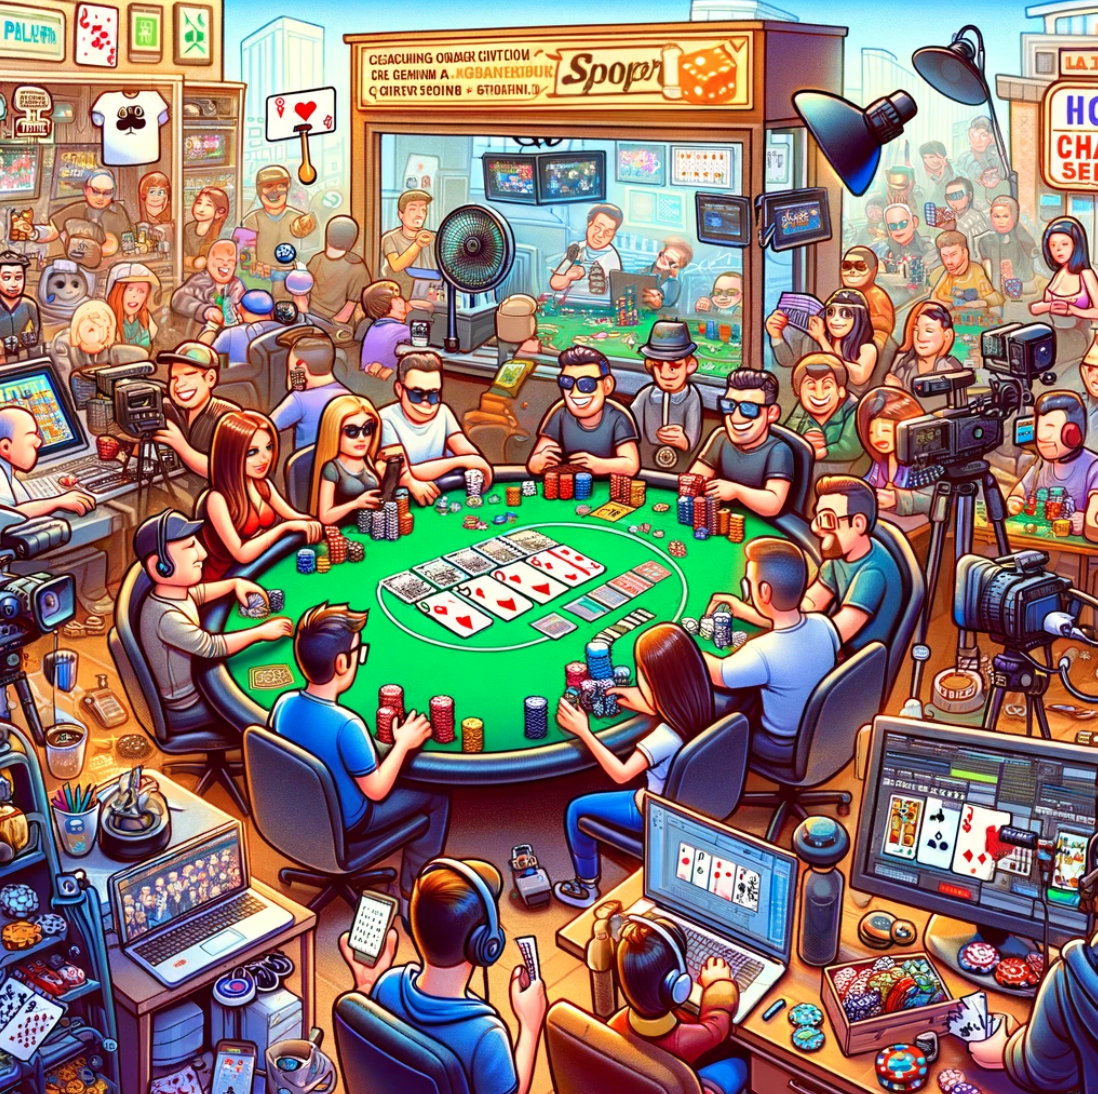 Here is a cartoon image depicting a bustling online poker business. The scene captures various poker-related activities and conveys the lively atmosphere of a thriving poker enterprise.